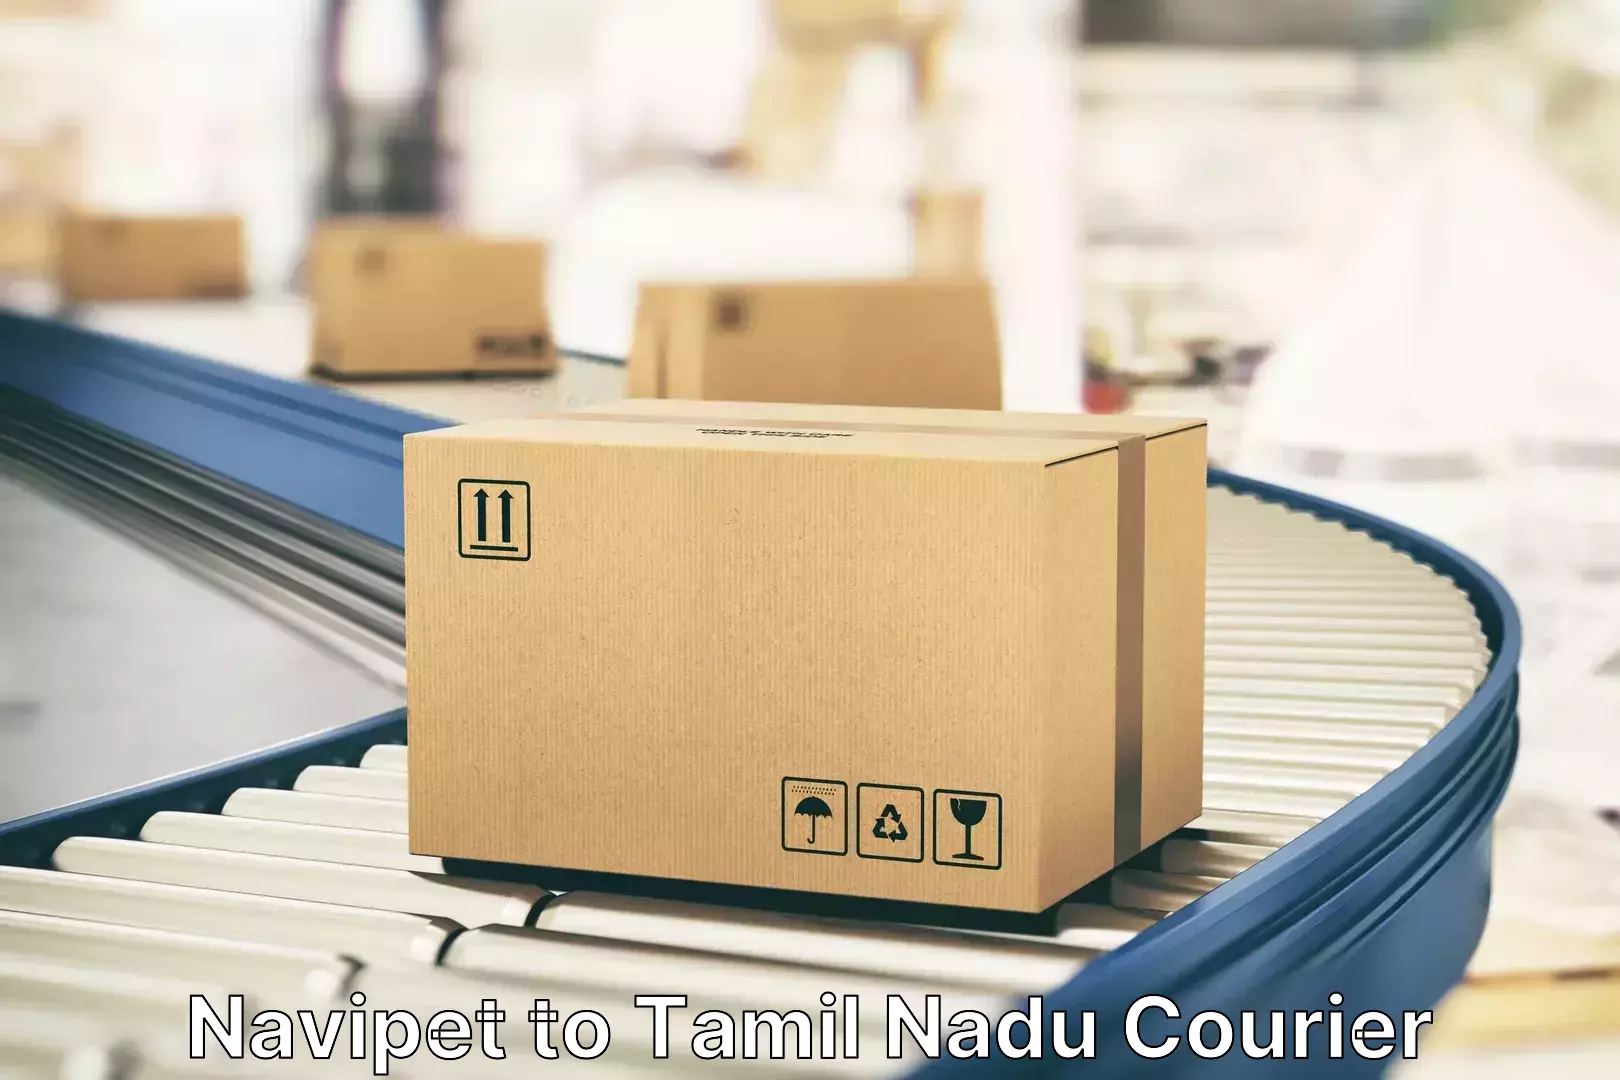 Luggage shipment specialists Navipet to Aruppukkottai